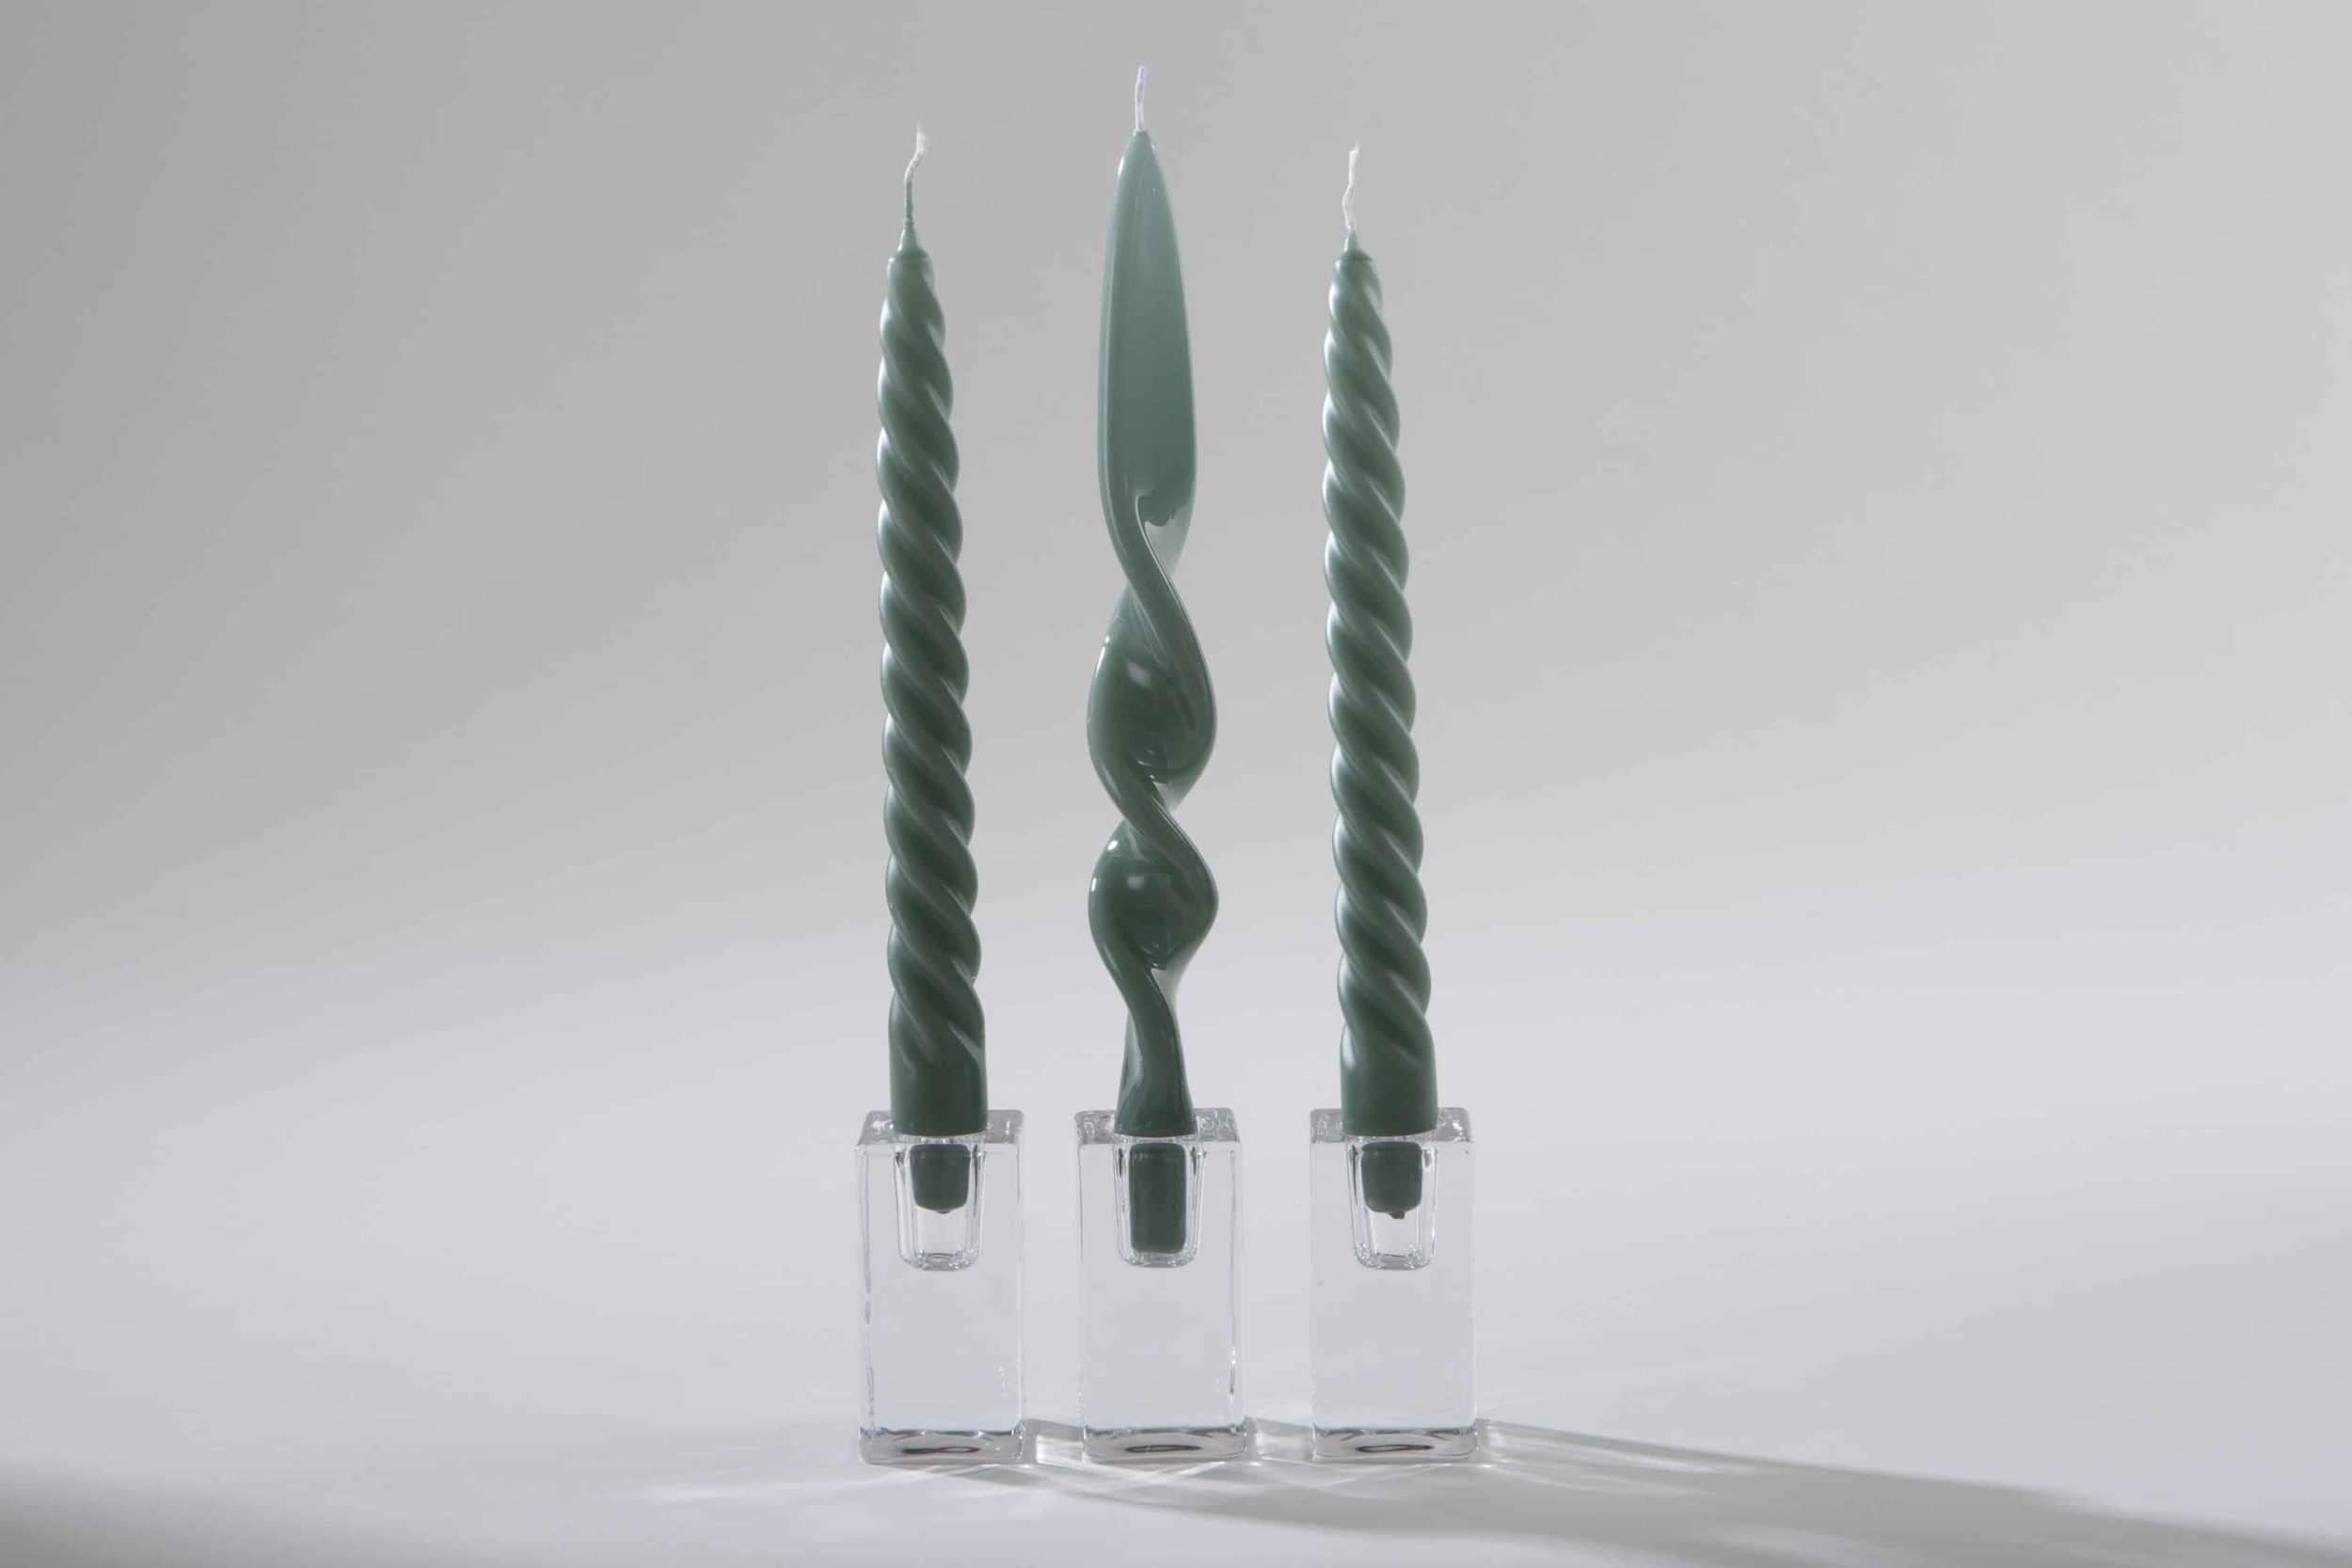  | Whether in Teal or Glitz Pink, these twisted candles with their sophisticated minimalist design are a showstopper. Somehow, they are more than just a candle, almost a small object of art that not only looks great on the table but also as an eye-catcher on sideboards or bar trolleys.Our spiral candles are carefully made by hand in a traditional manufactory in Italy.  The softly shaped candles look particularly good in our “Baradero” candle holders made of clear glass.We exclusively offer can... | 